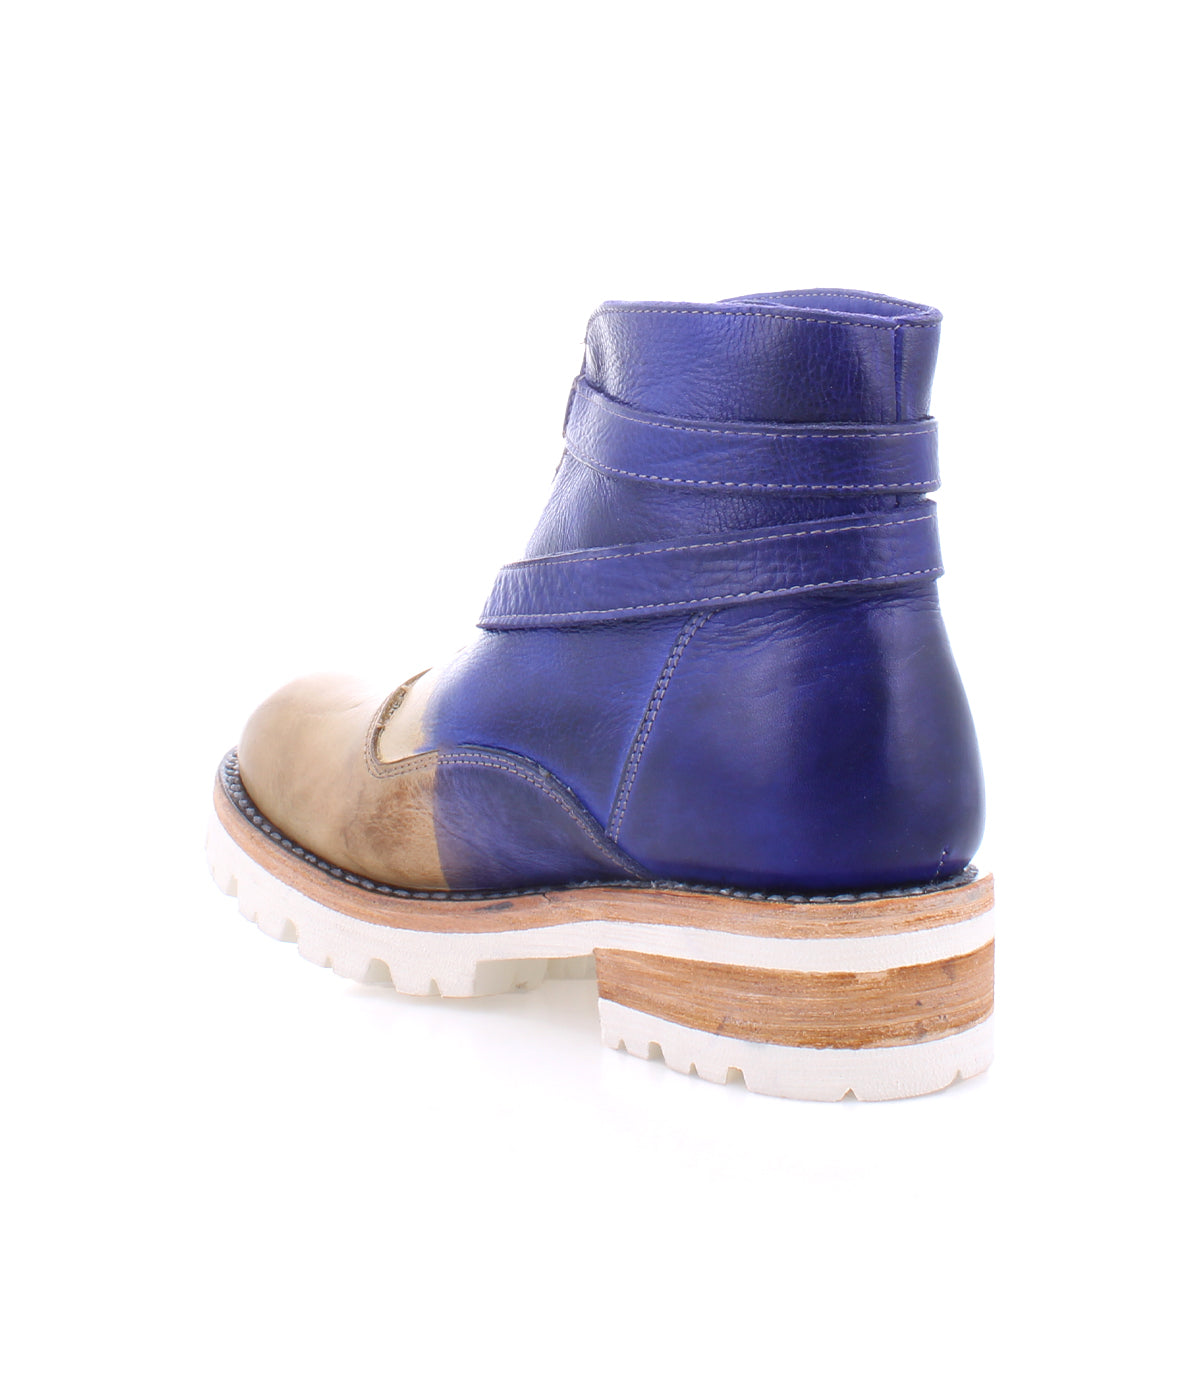 A pair of lightweight blue leather Dessa boots with crisscross straps and a white sole by Bed Stu.